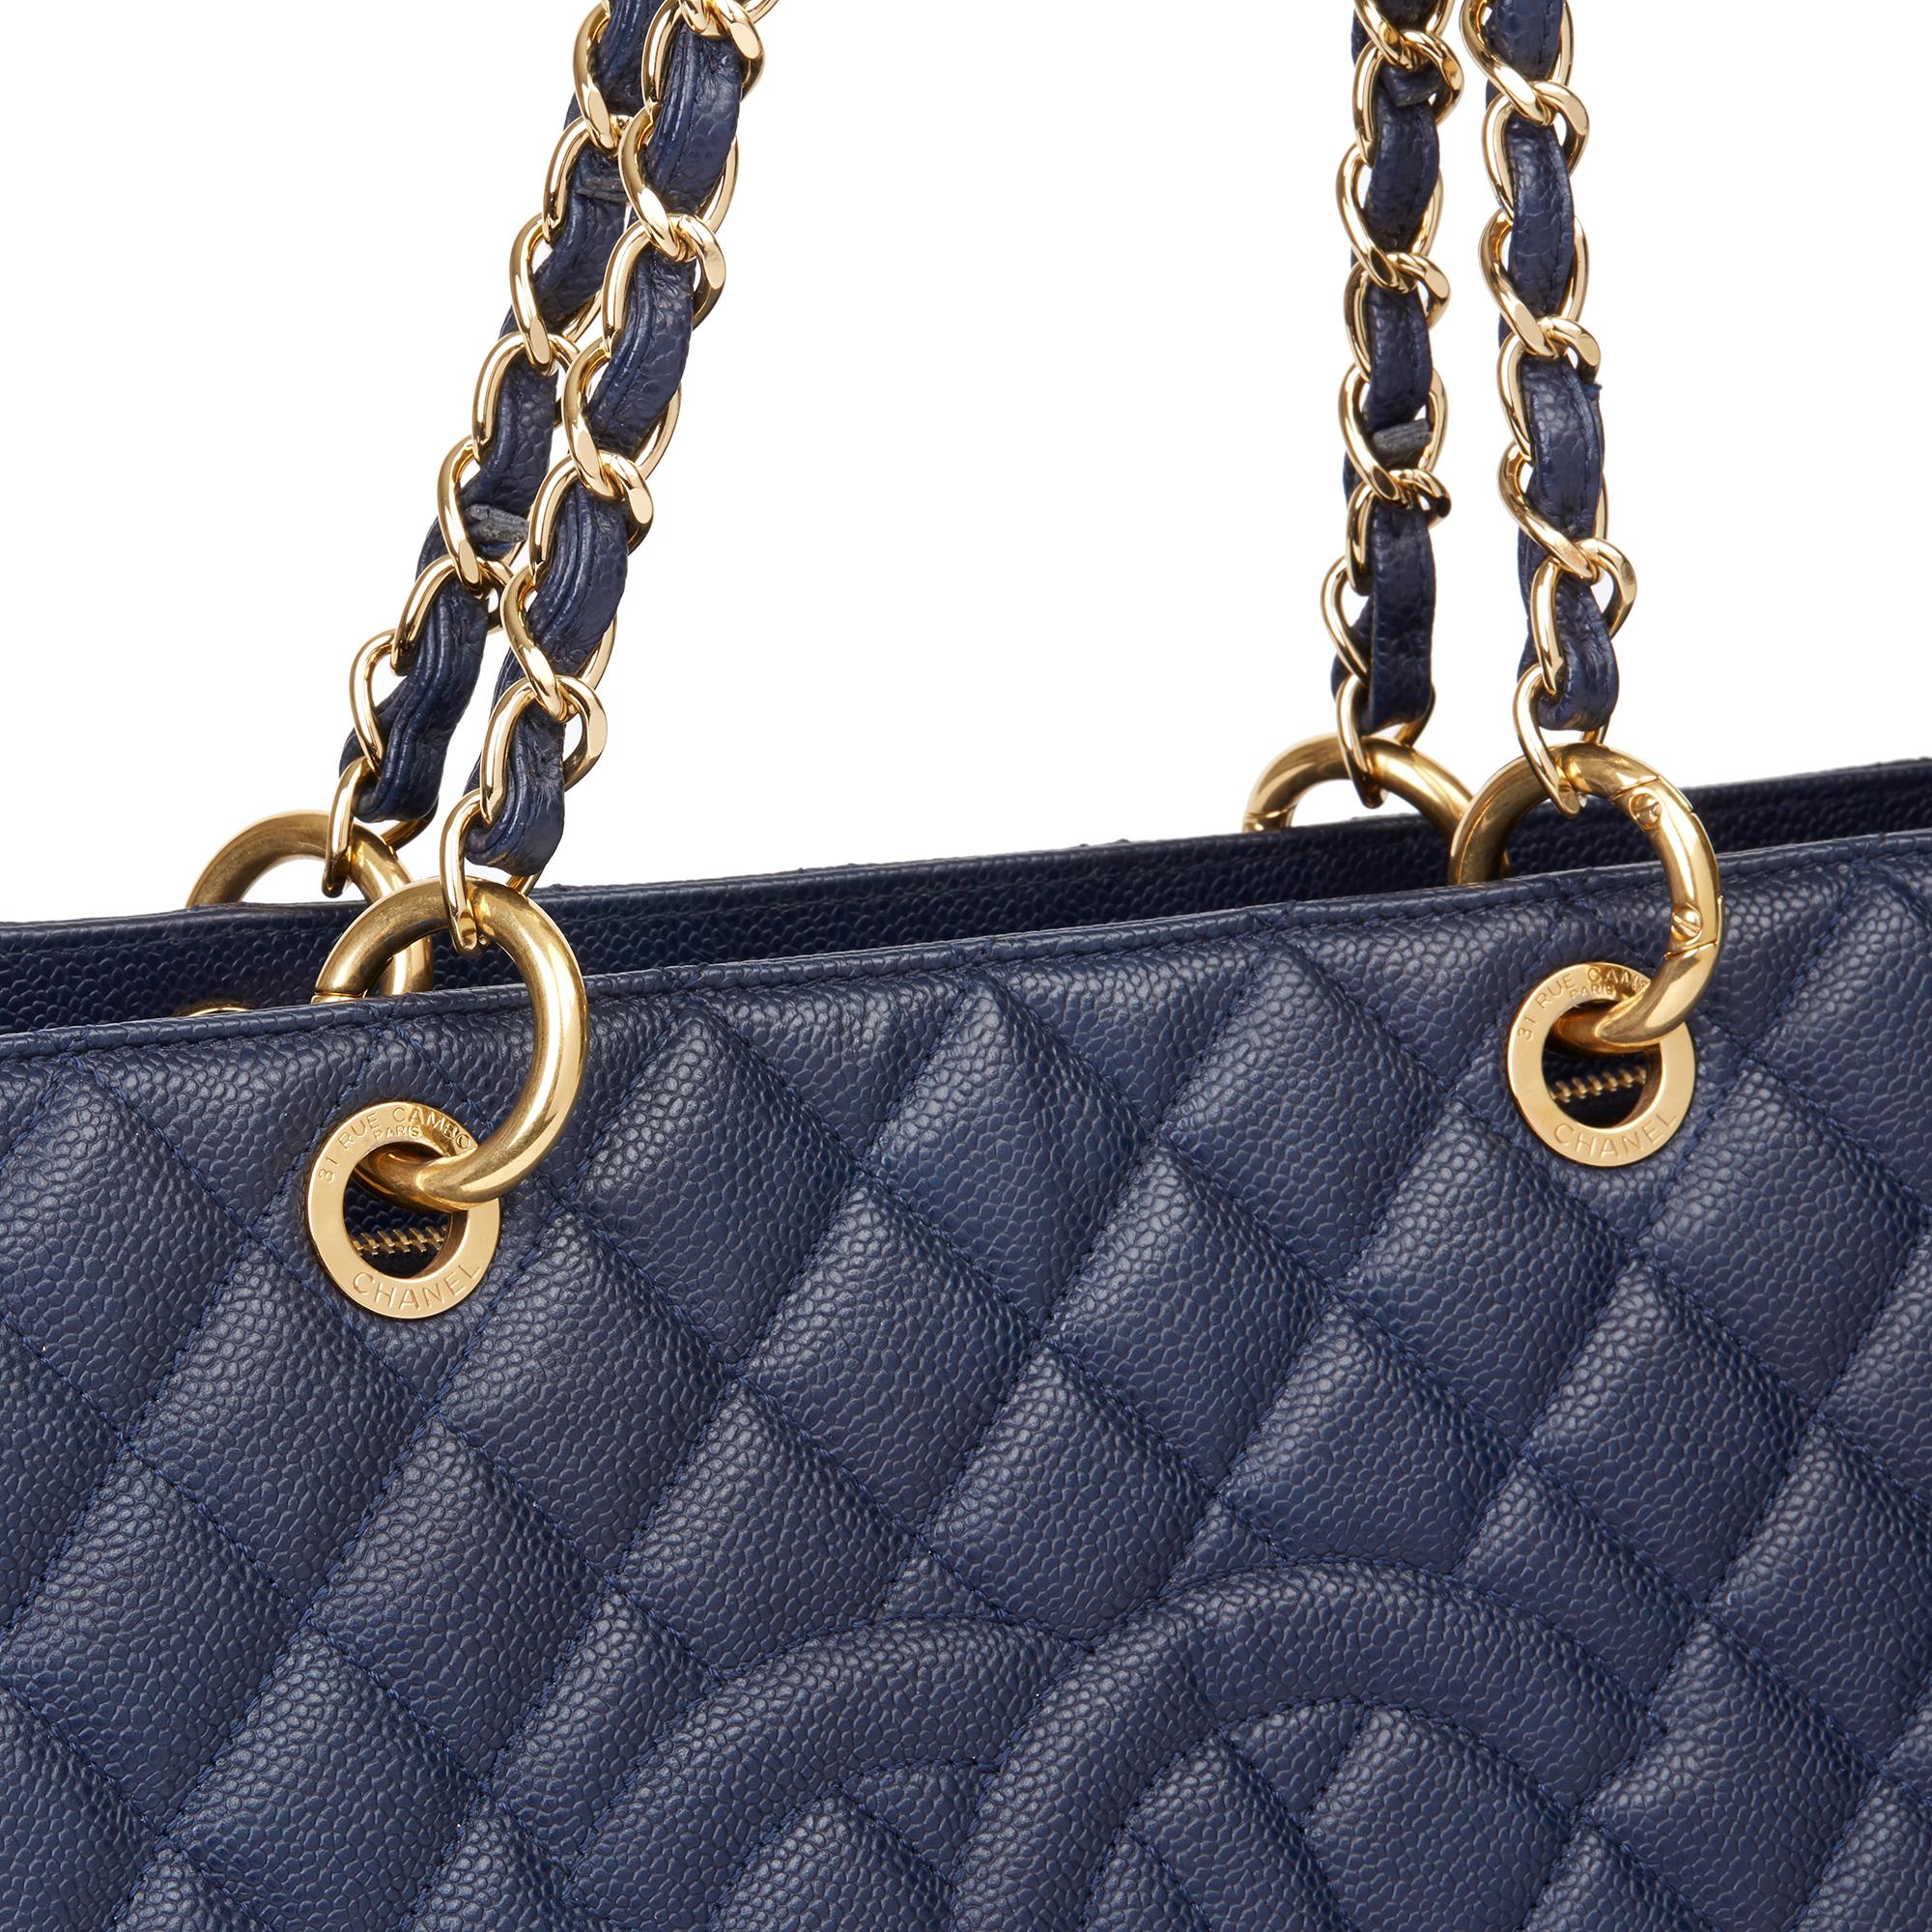 2014 Chanel Navy Quilted Caviar Leather Grand Shopping Tote XL GST 2